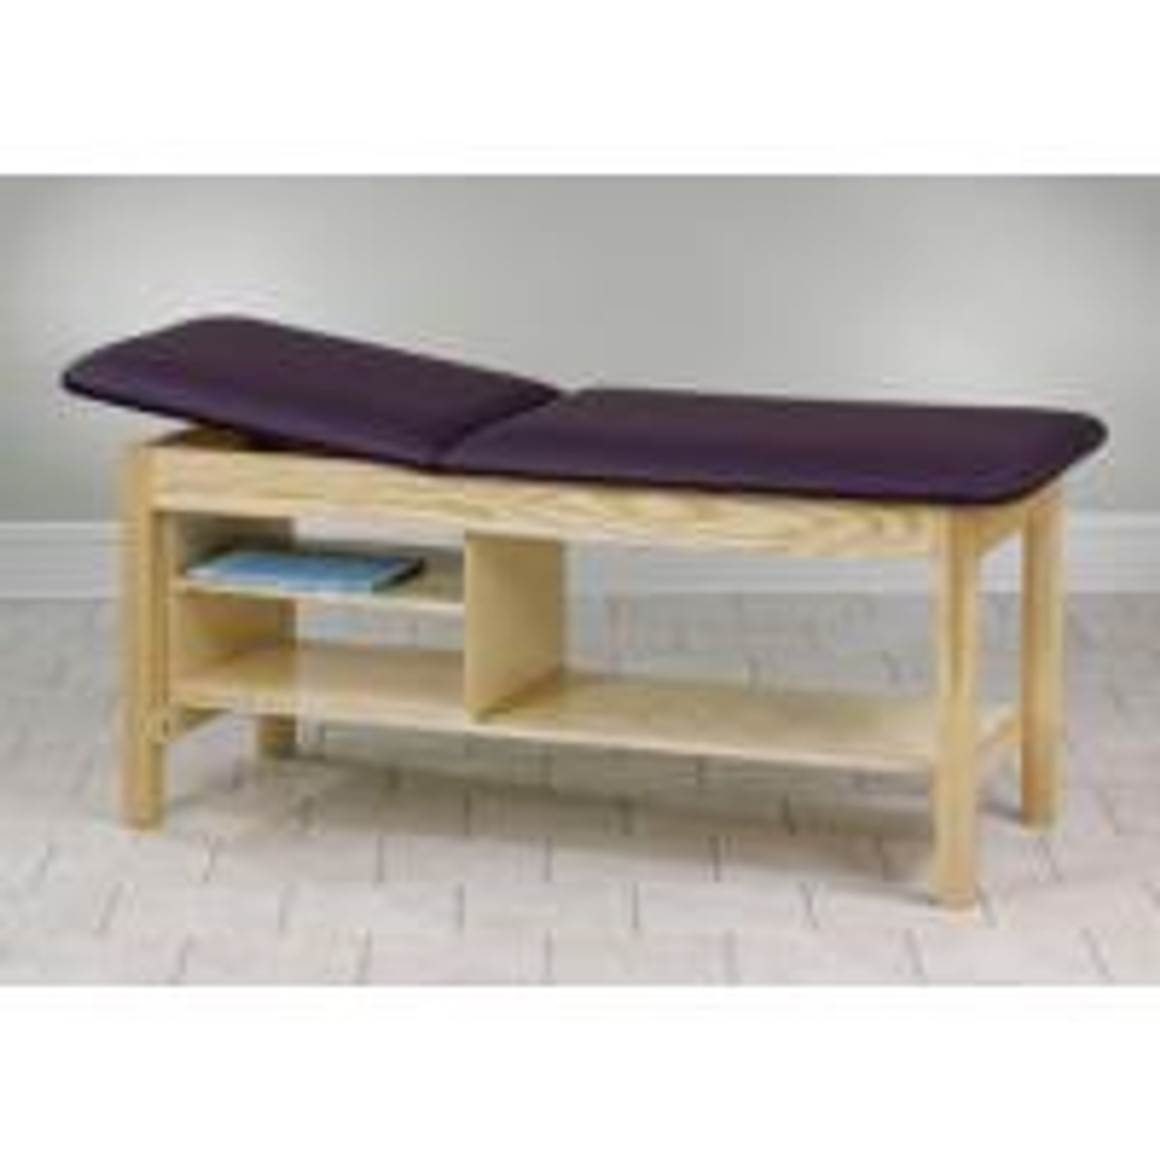 Clinton Classic Series Straight Line Treatment Table with Shelving Unit, 27" Wide, Clamshell